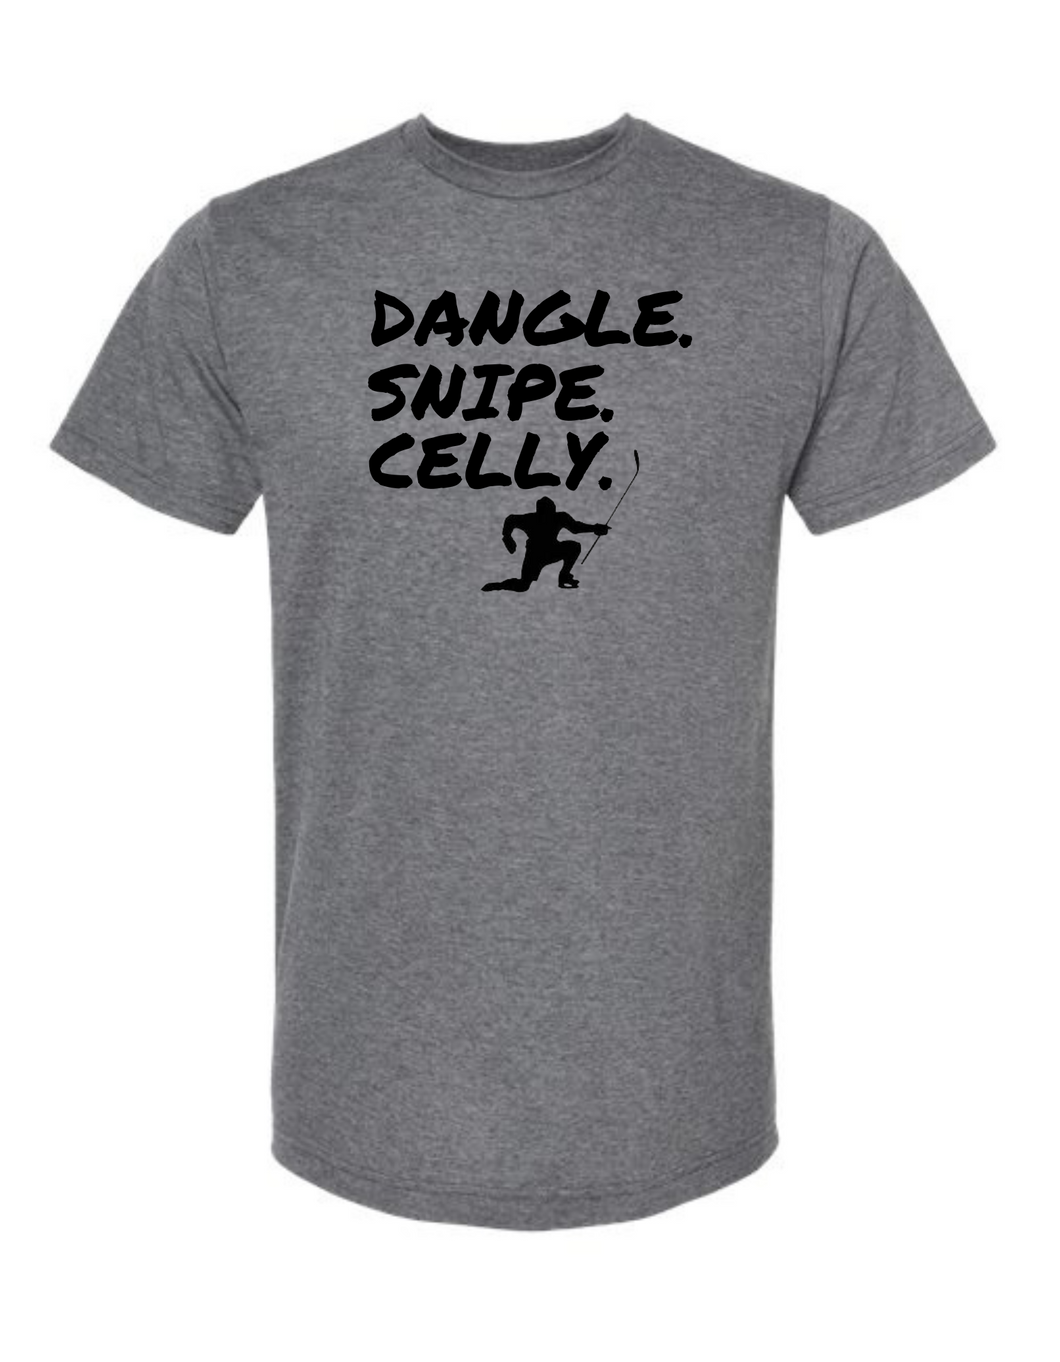 Dangle. Snipe. Celly. T